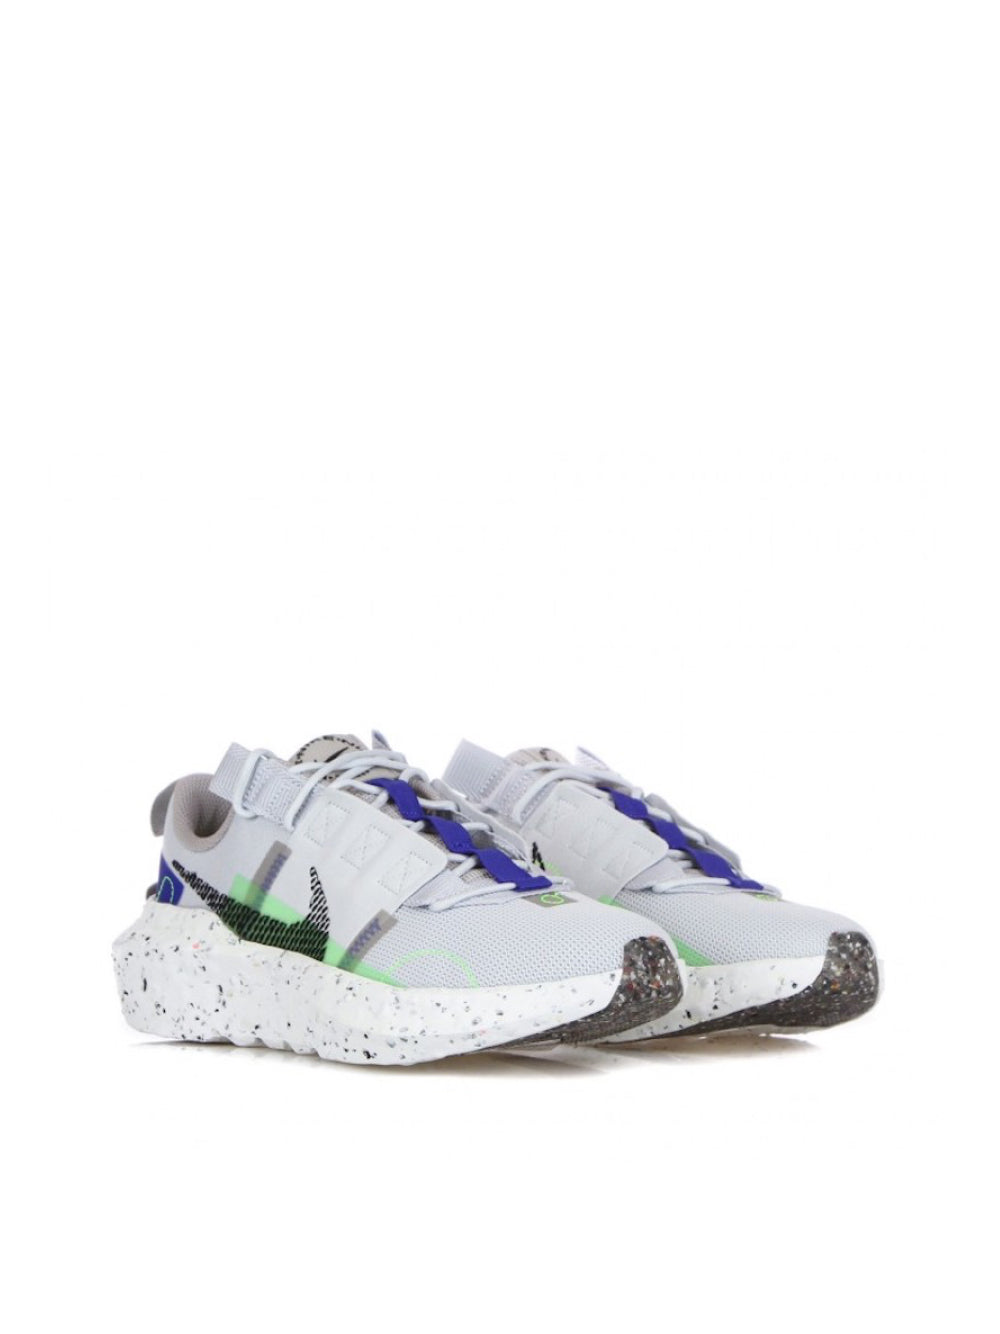 Nike-OUTLET-SALE-Crater Impact Sneakers-ARCHIVIST